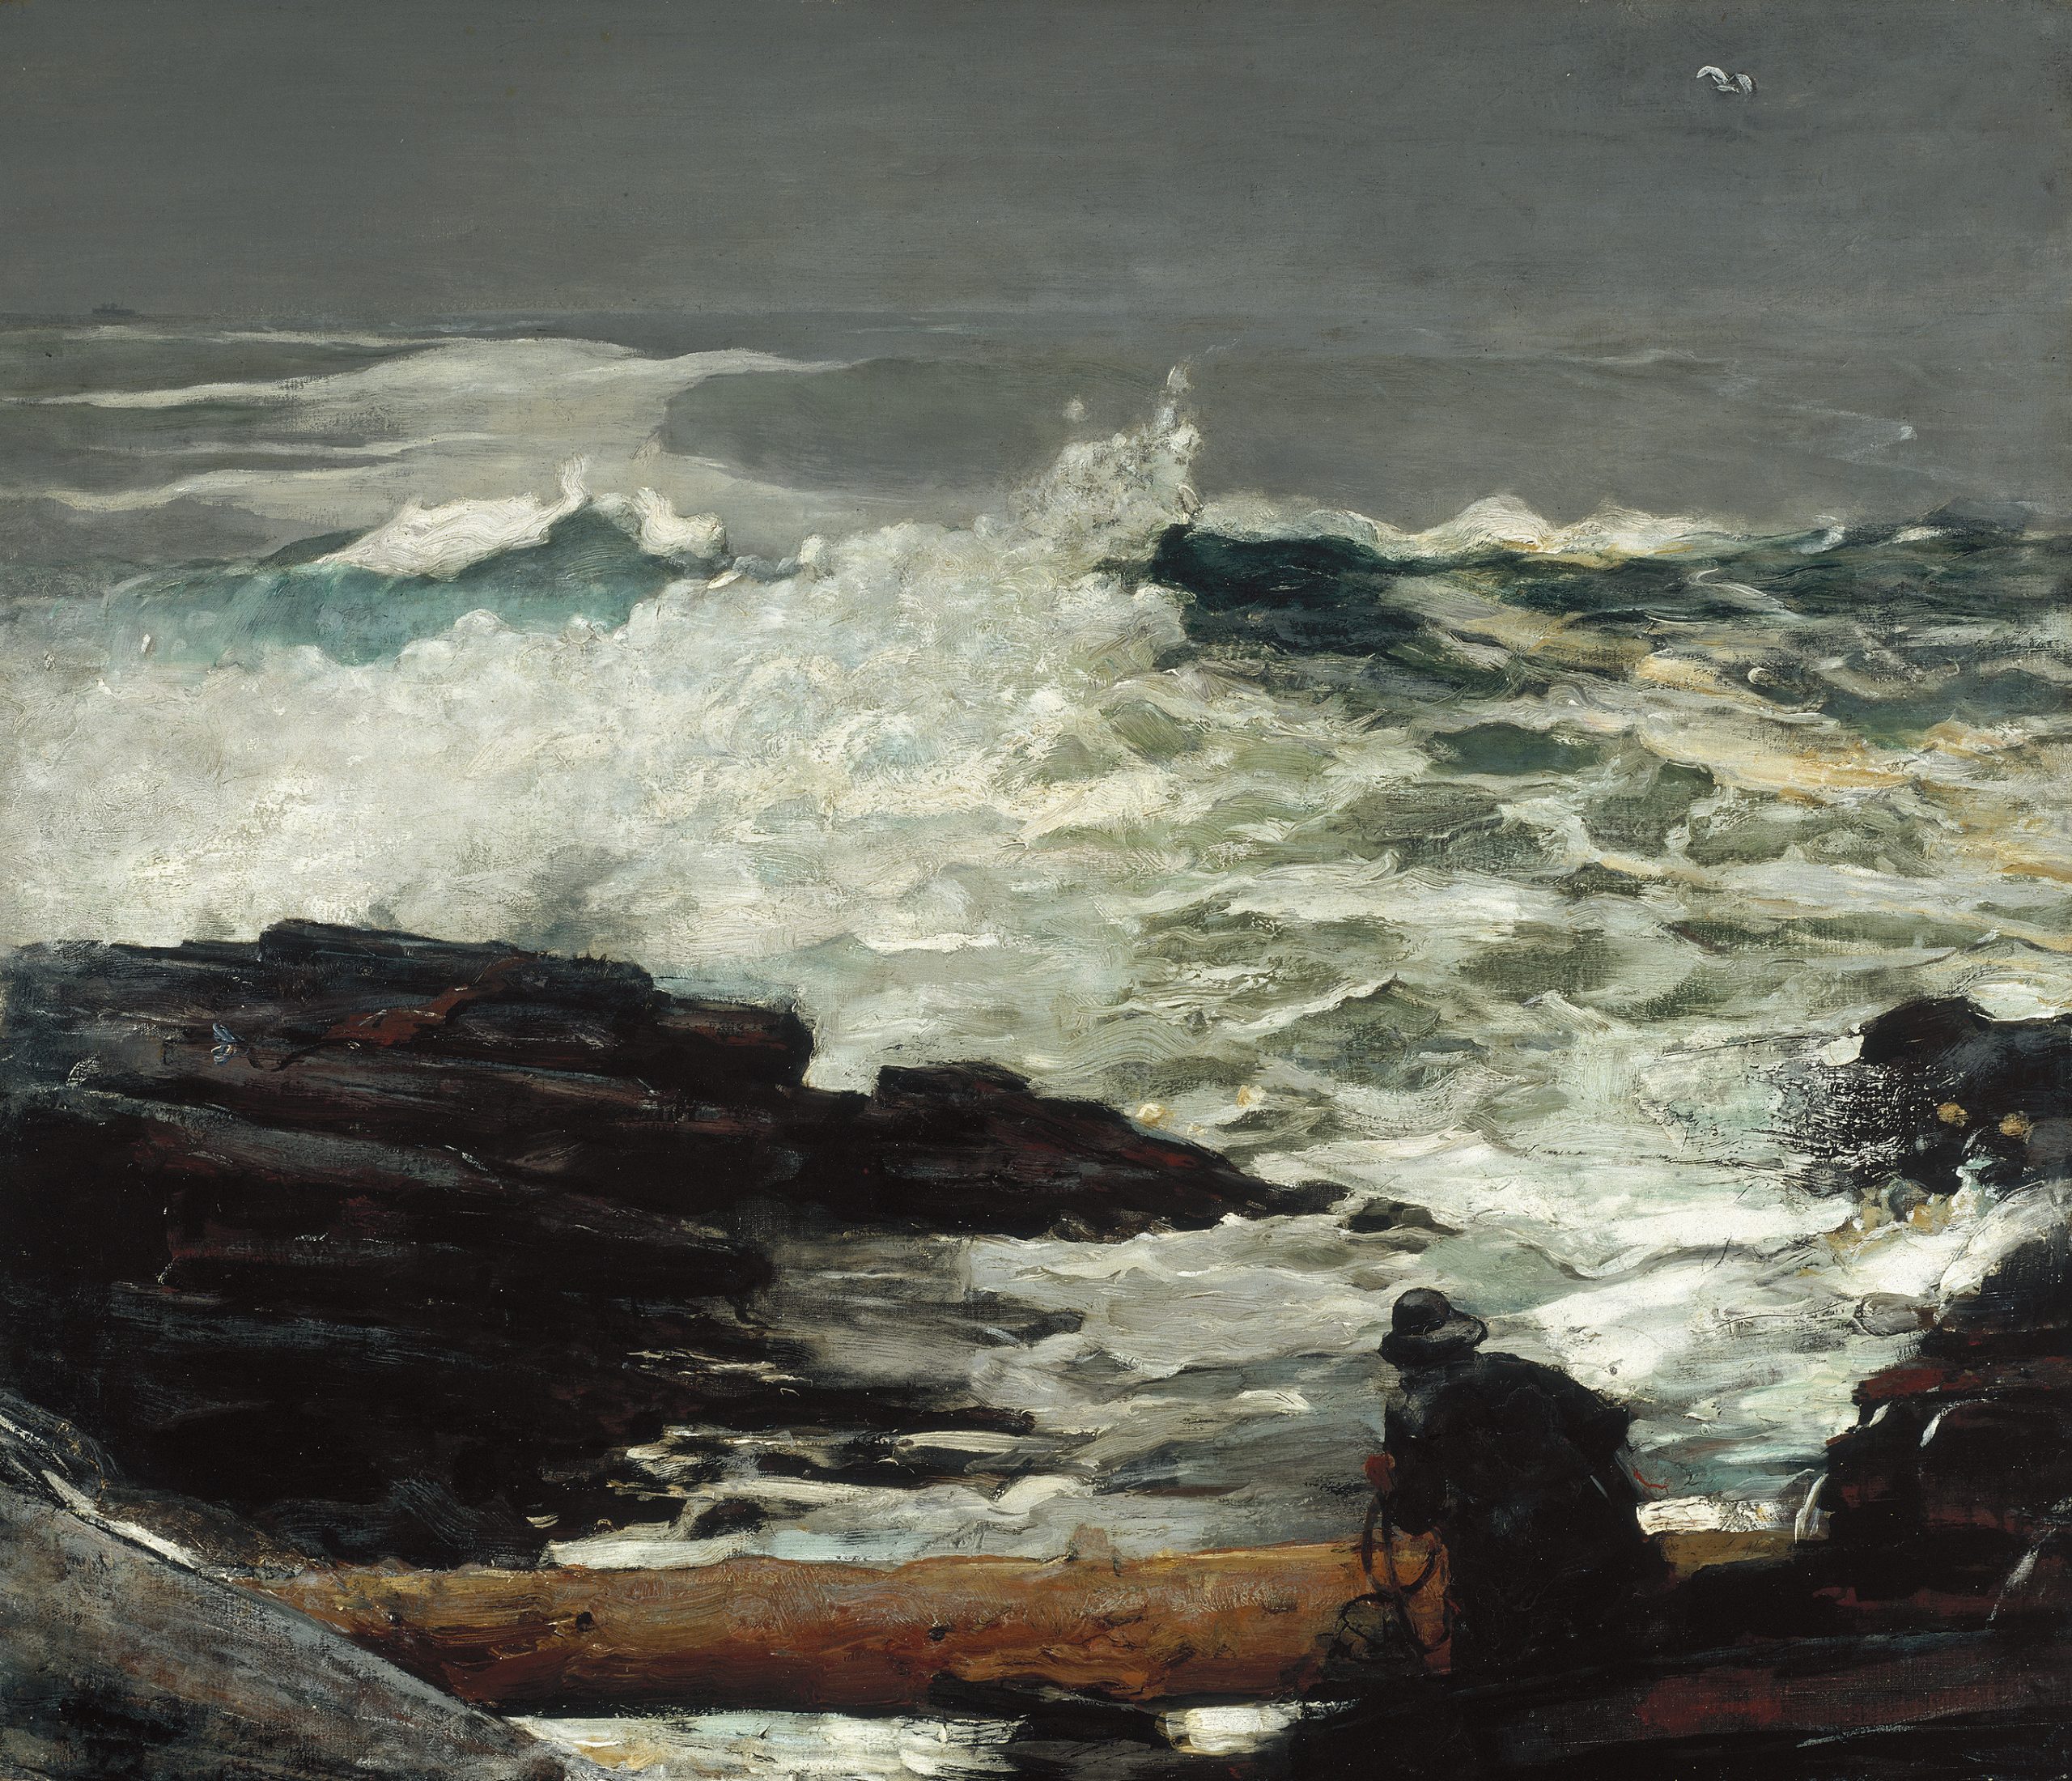 Winslow Homer Driftwood, 1909, Oil on canvas, 62.2 x 72.4 cm, Museum of Fine Arts, Boston, Massachusetts
Henry H. and Zoe Oliver Sherman Fund and other funds 1993.564
© Museum of Fine Arts, Boston, Massachusetts